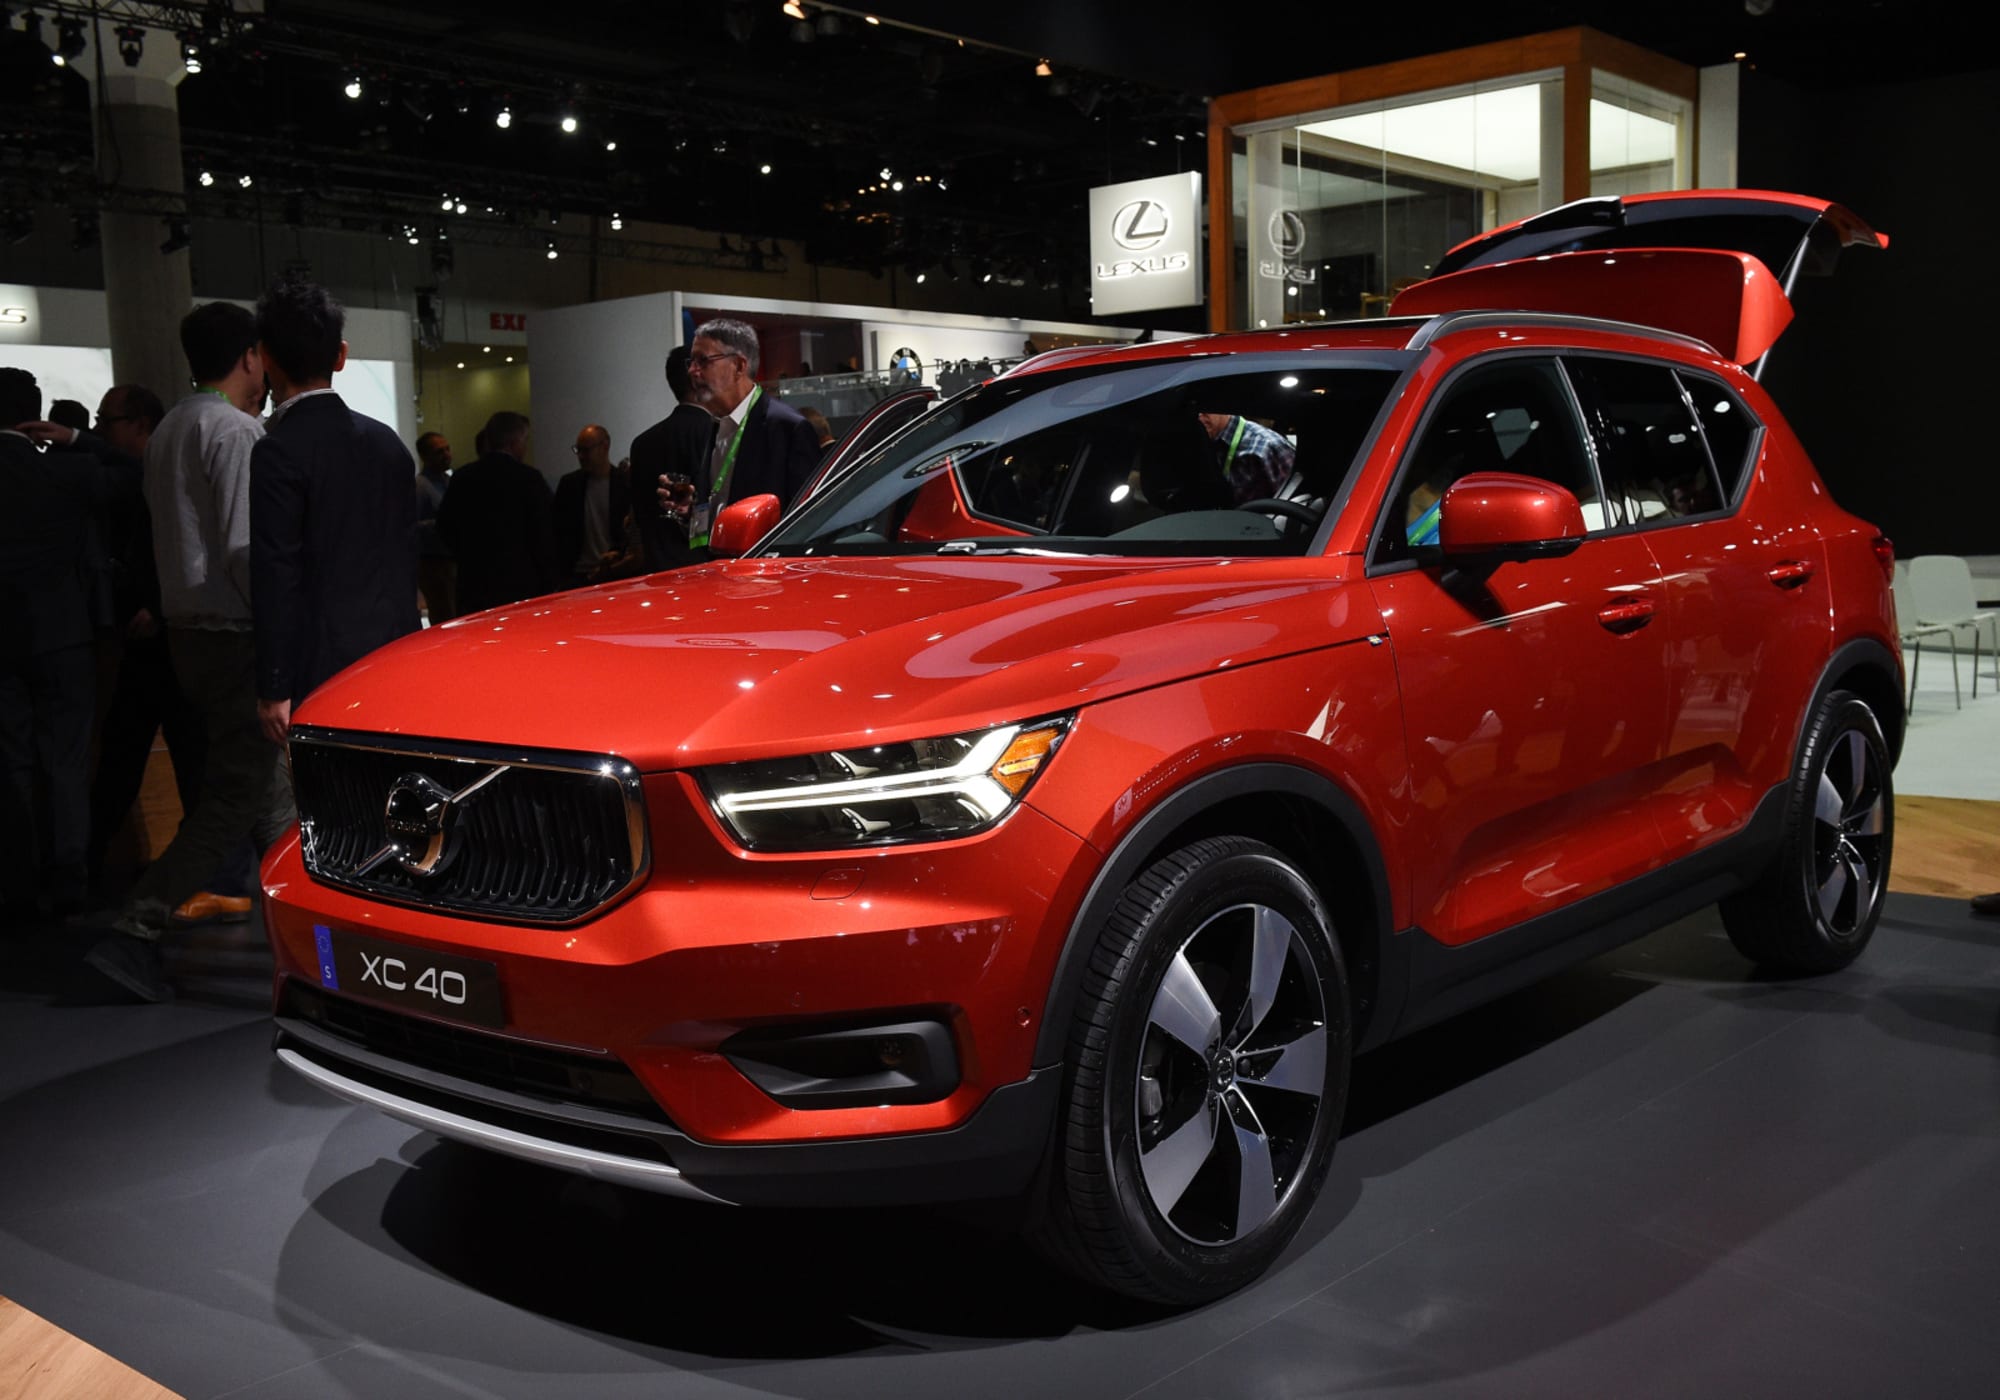  Volvo  XC40 Is Unveiled as the Brand s First Electric  Car